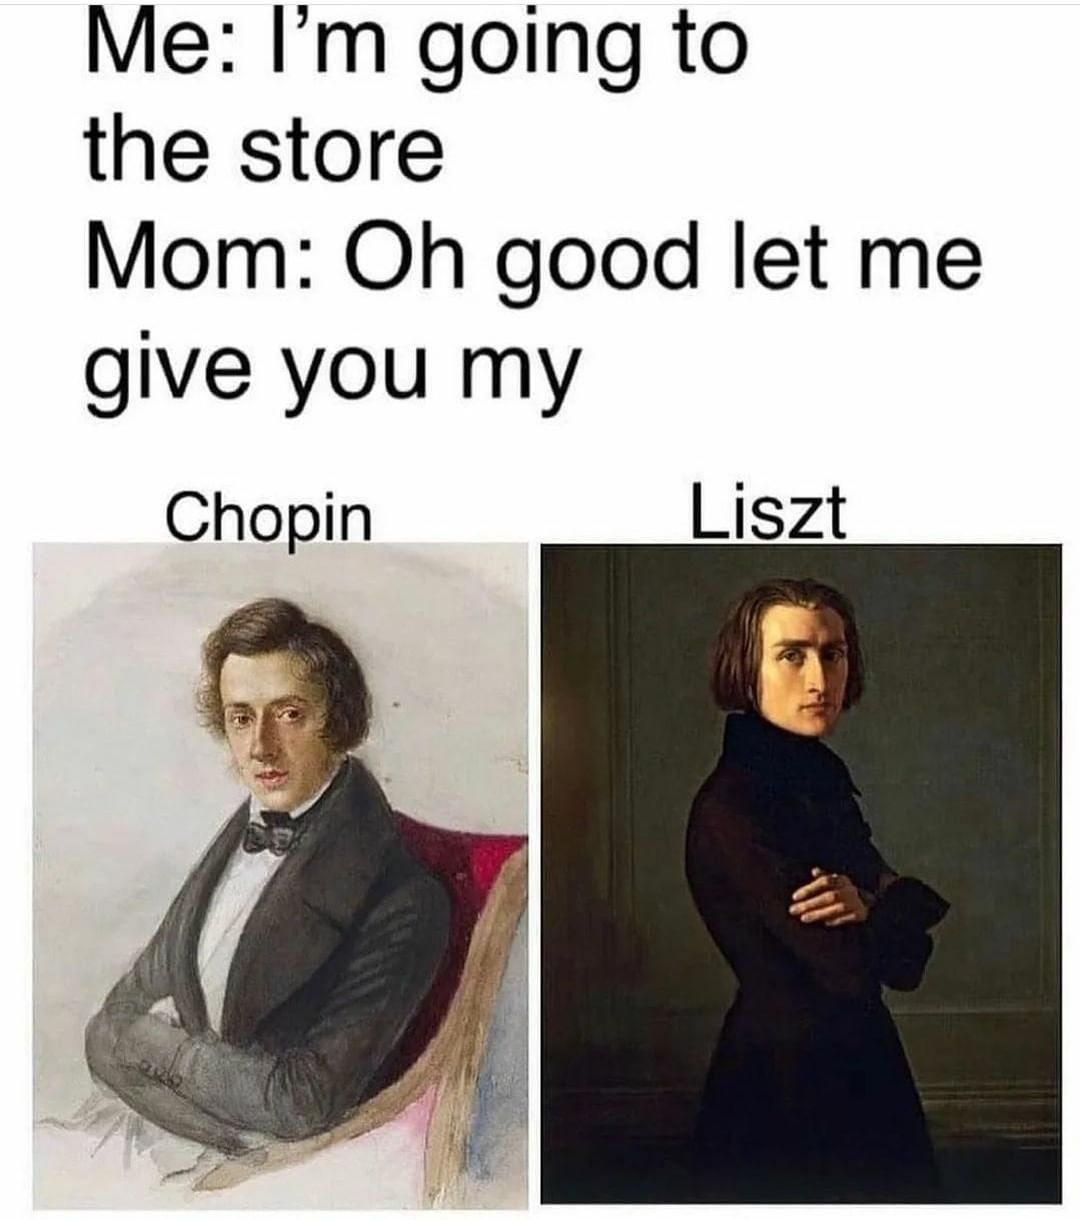 Me: I'm going to the store. Mom: Oh good let me give you my. Chopin. Liszt.